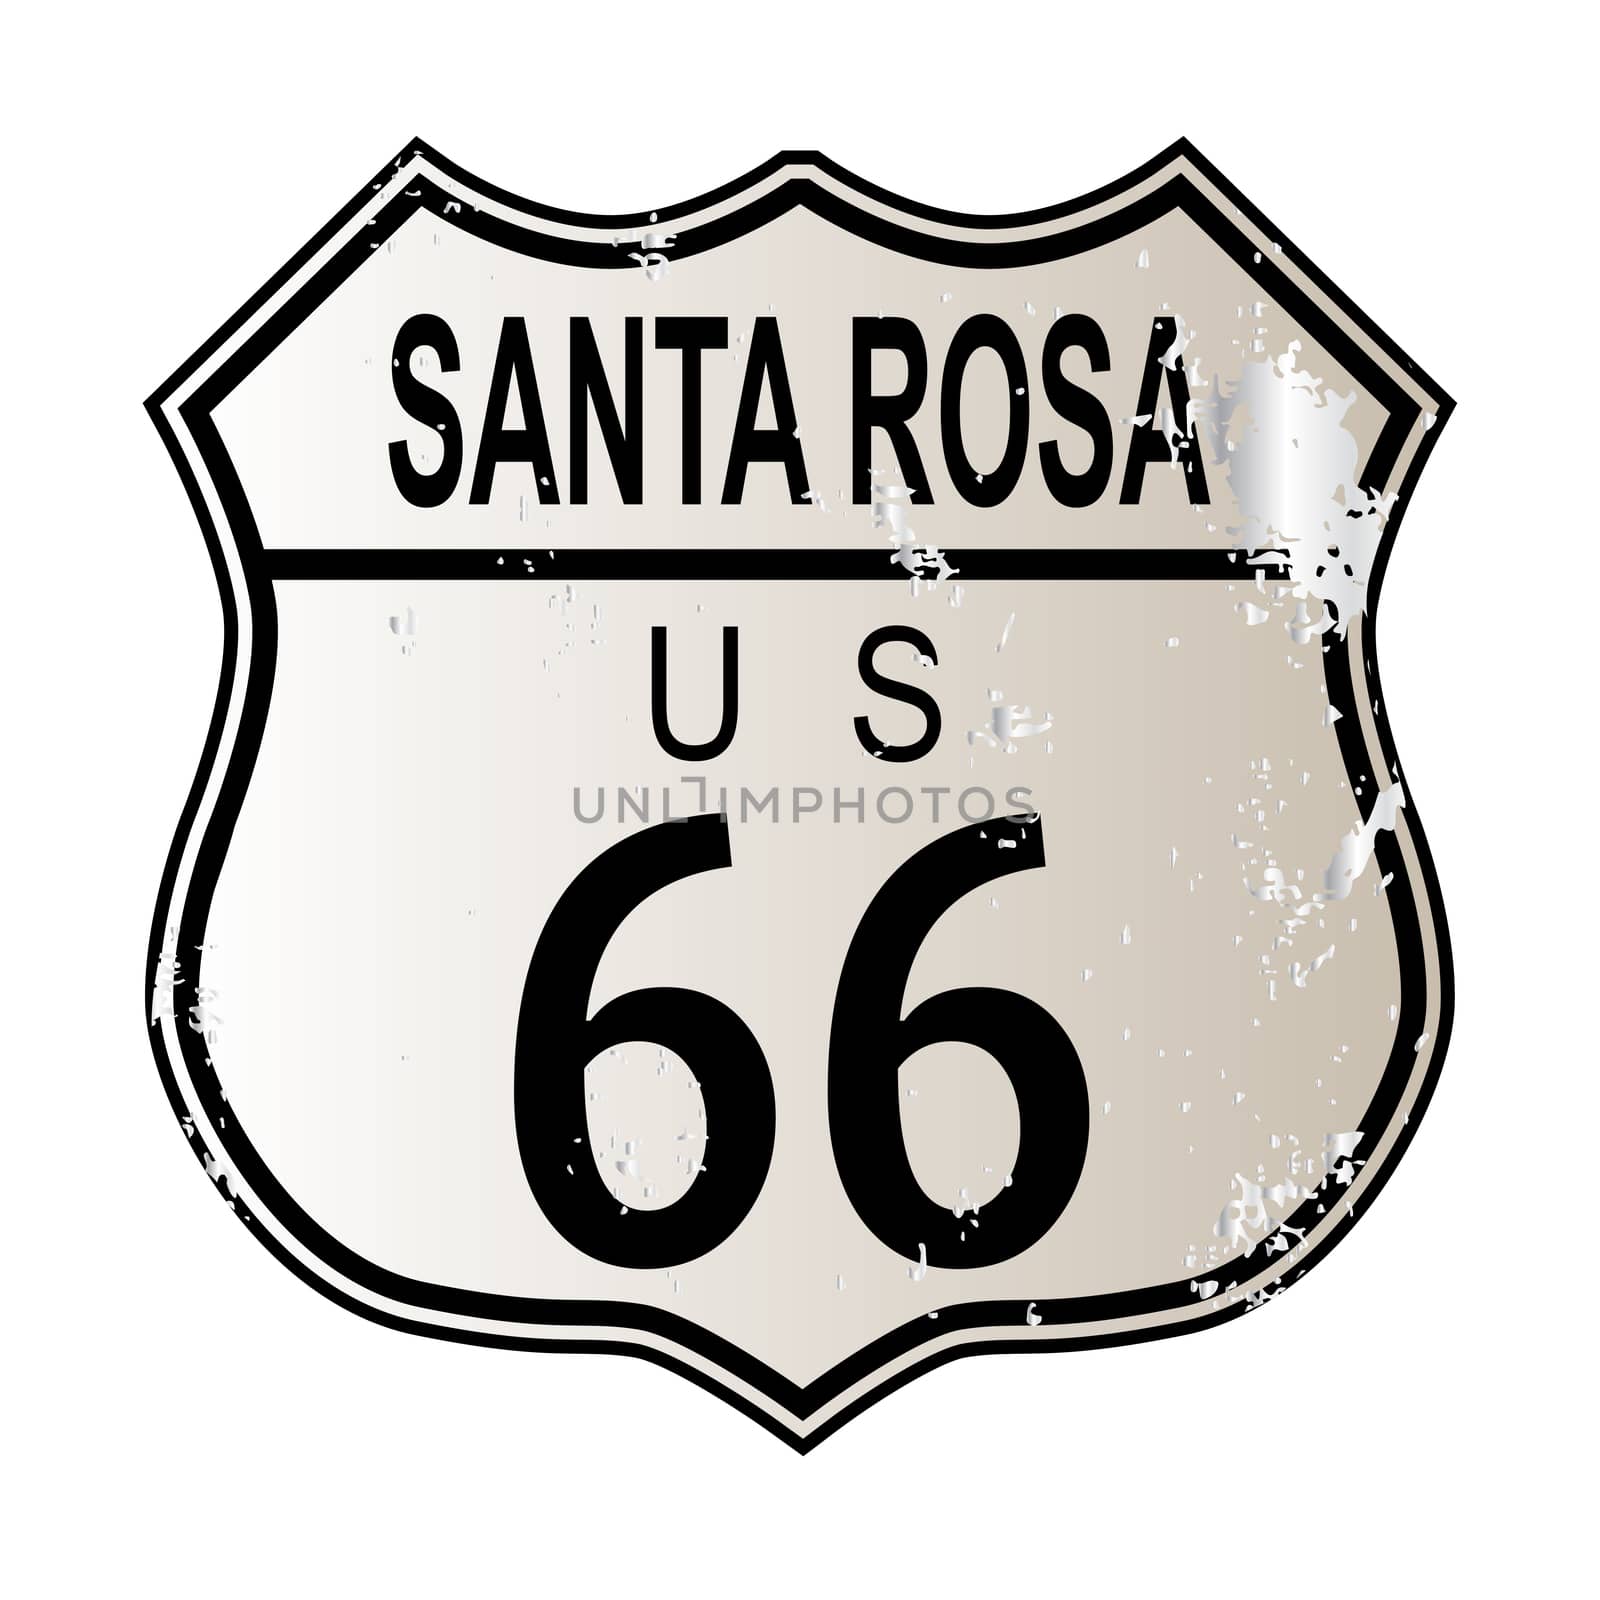 Santa Rosa Route 66 traffic sign over a white background and the legend ROUTE US 66